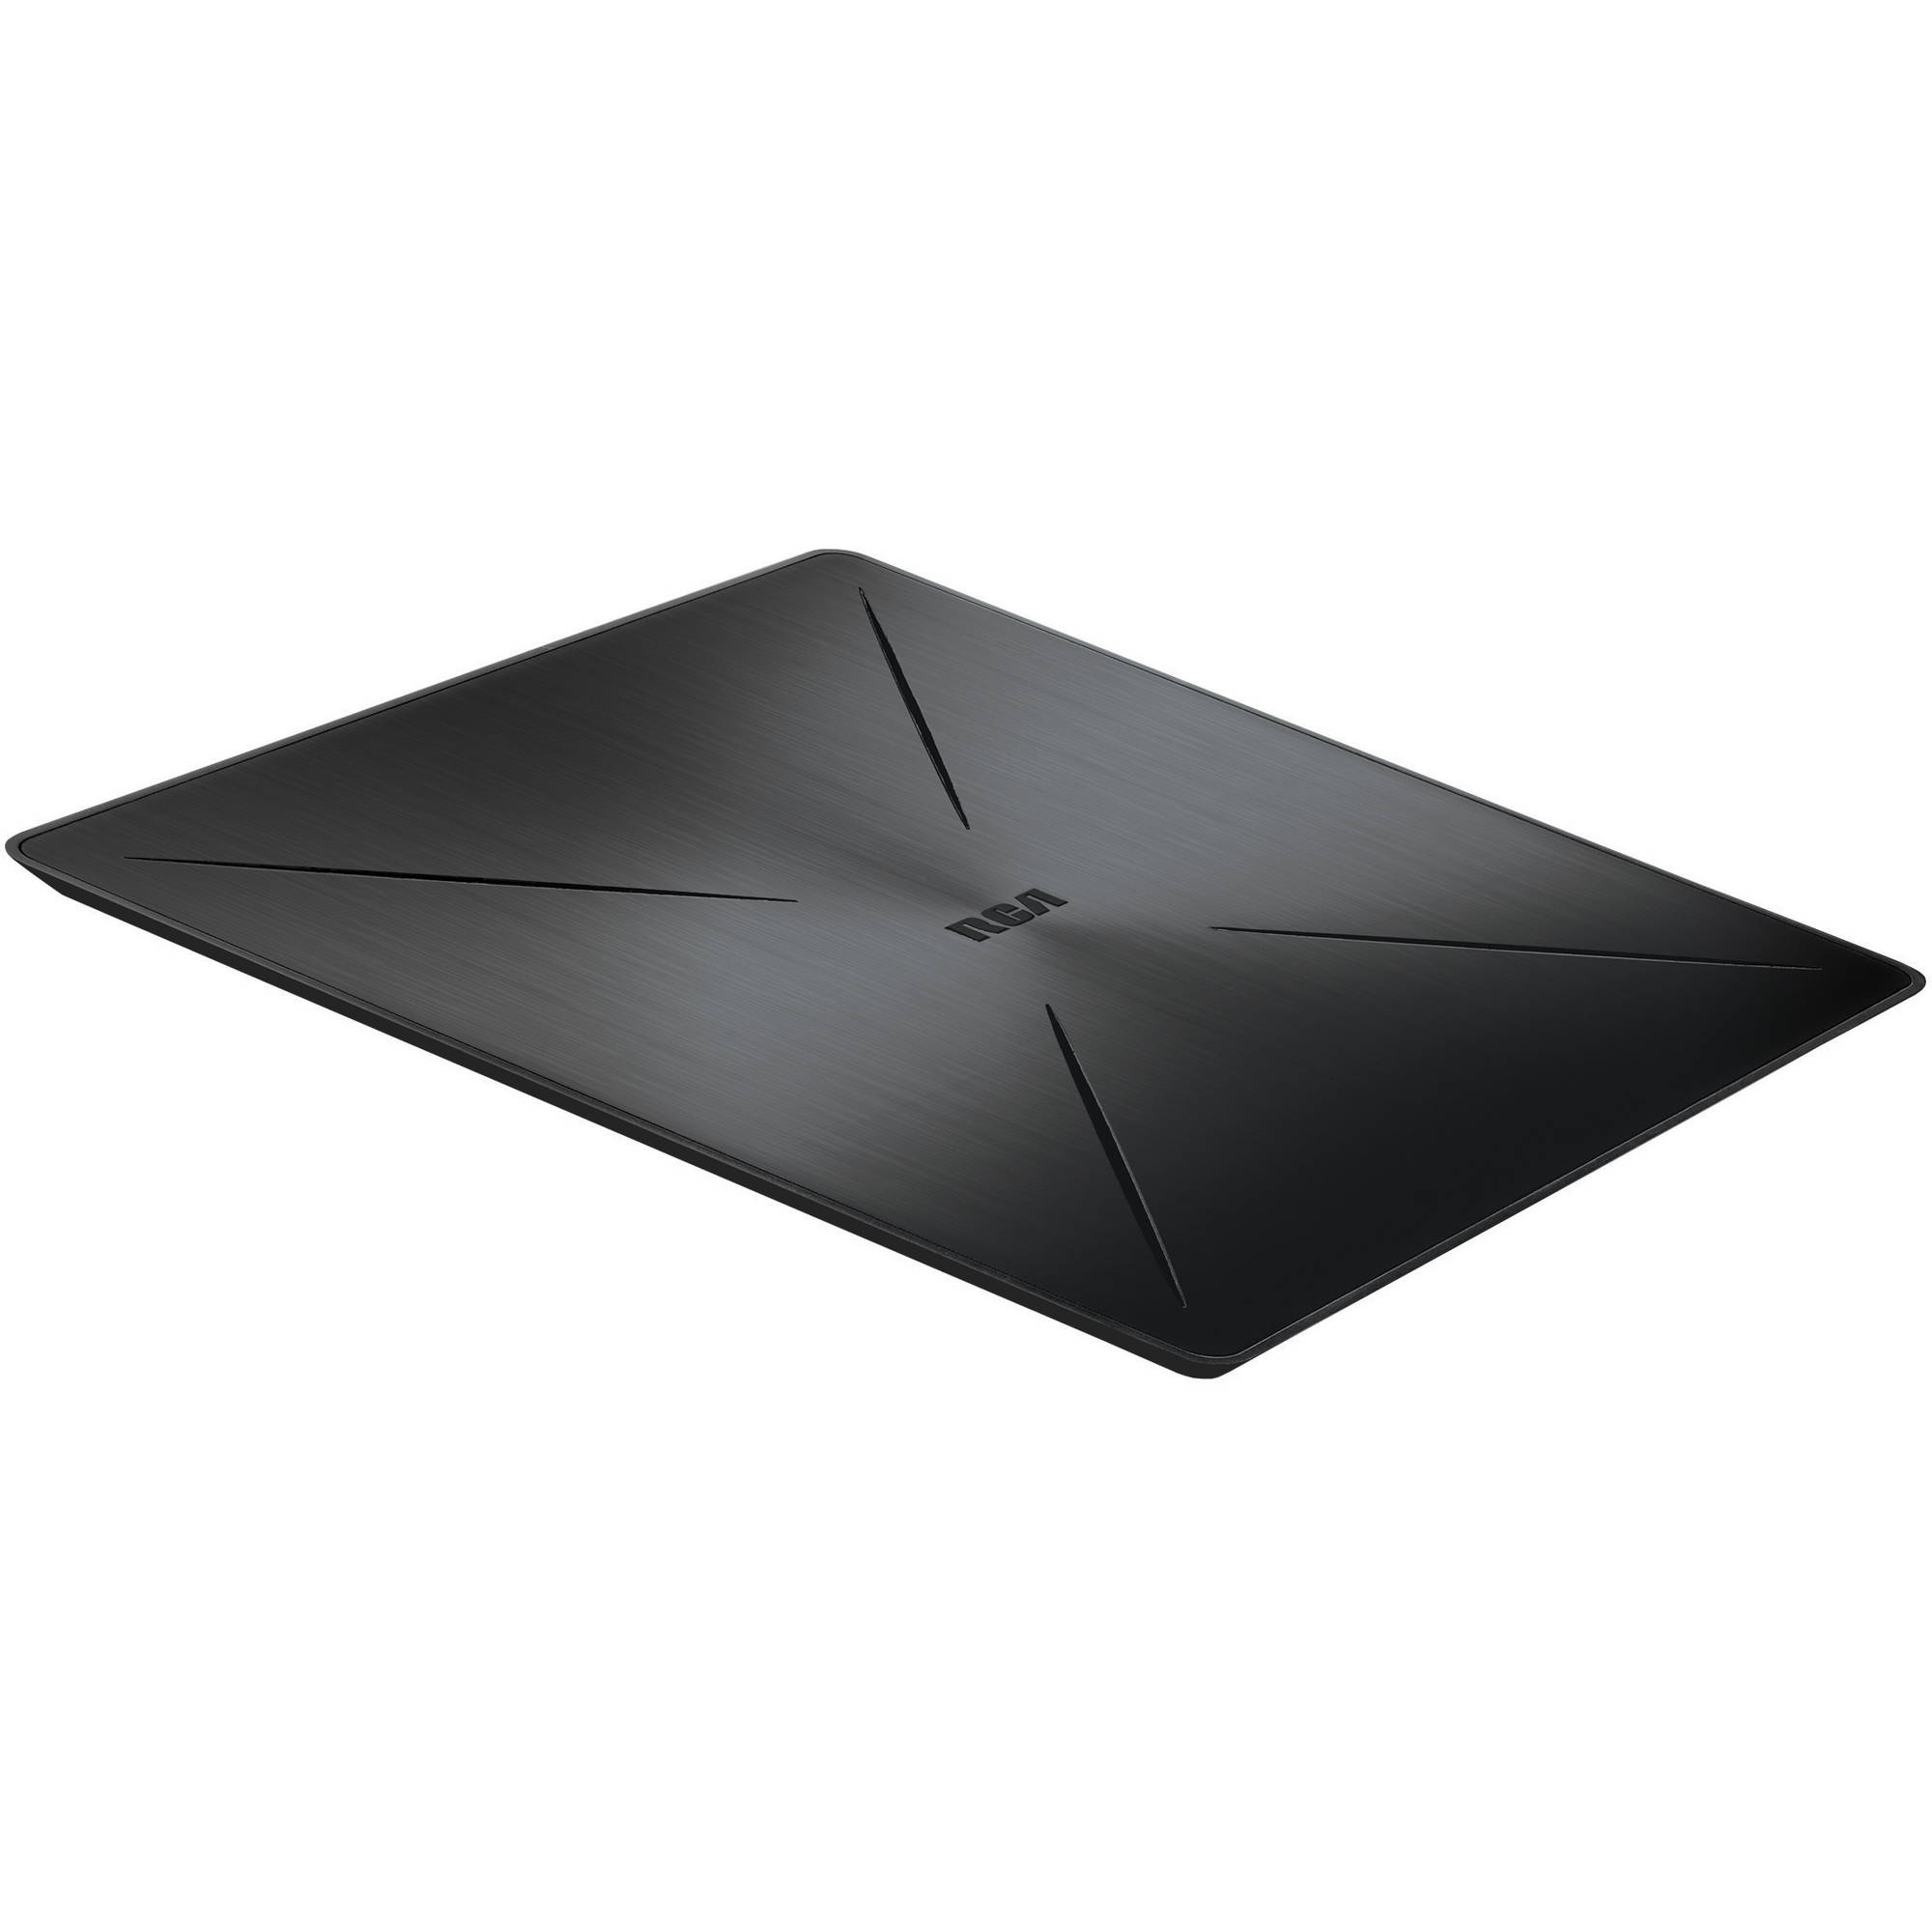 RCA Amplified Indoor Flat Black HDTV Antenna - Multi-Directional with Built-in Stand & up to 55-mile Range ANT1560E - image 3 of 8